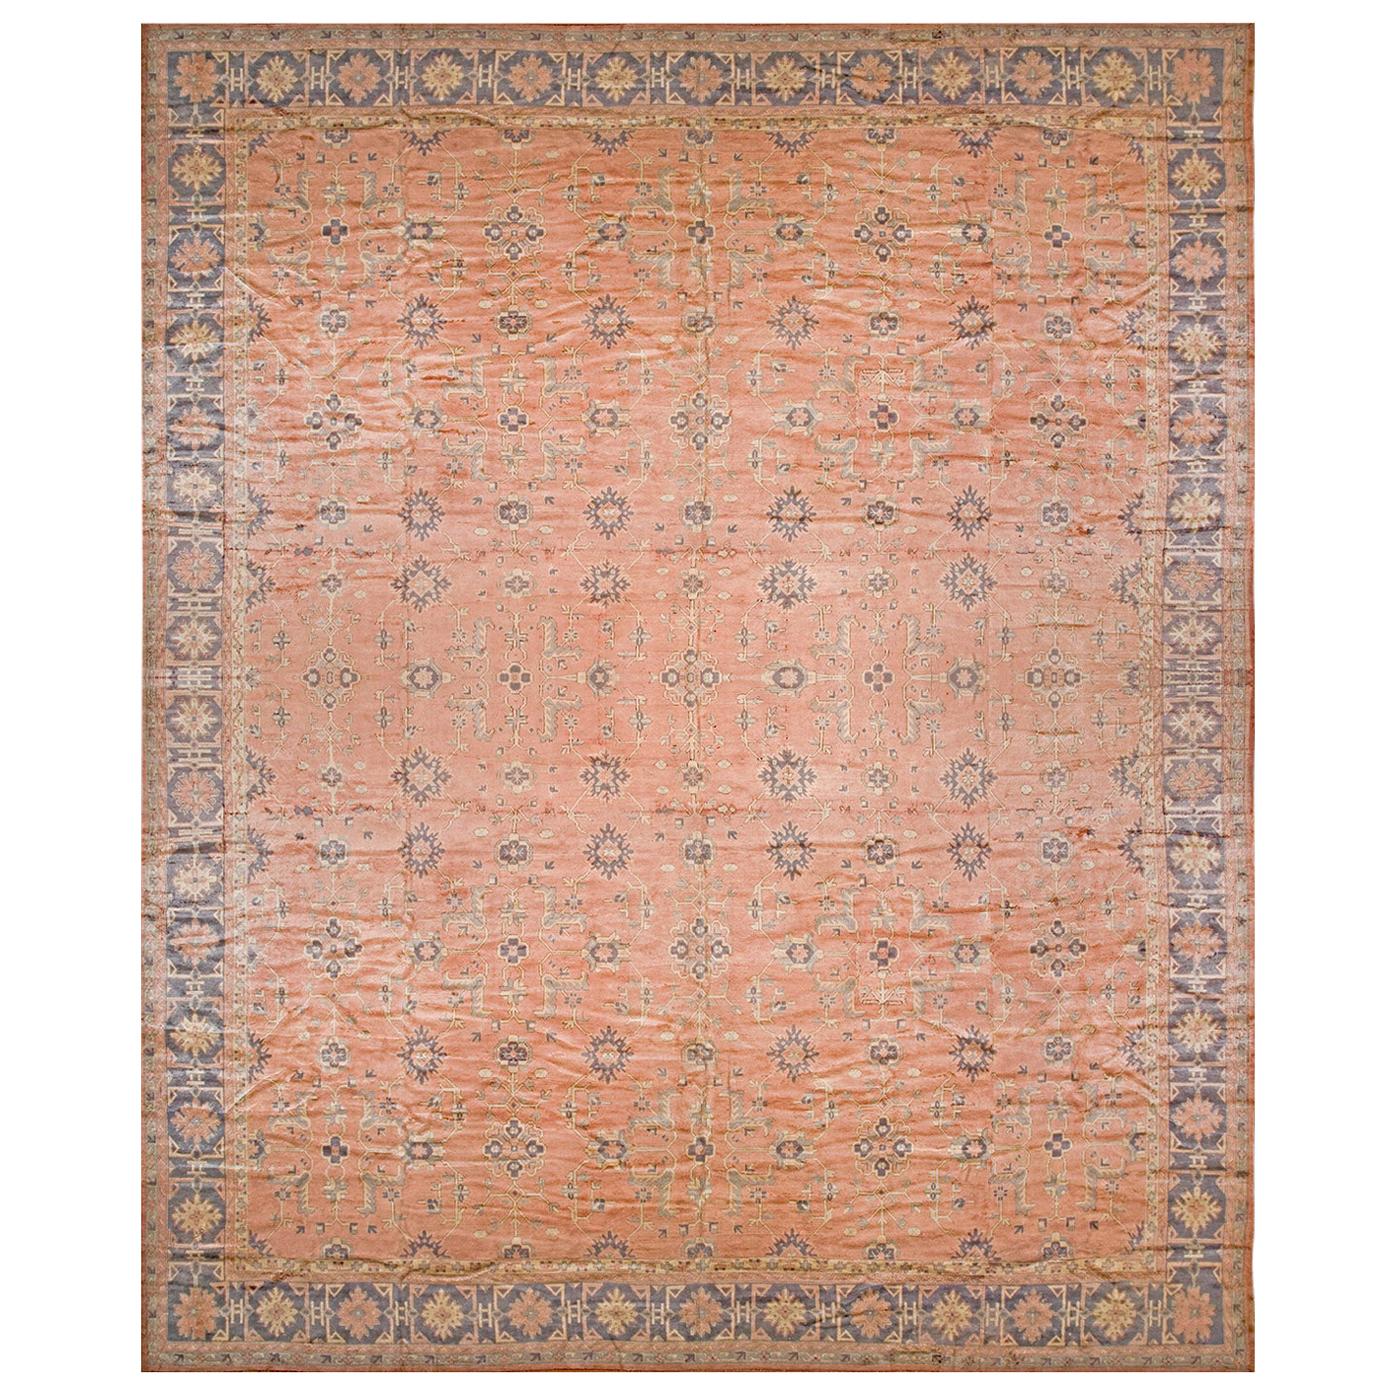 Early 20th Century Turkish Oushak Rug ( 20' x 22'6" - 610 x 685 ) For Sale